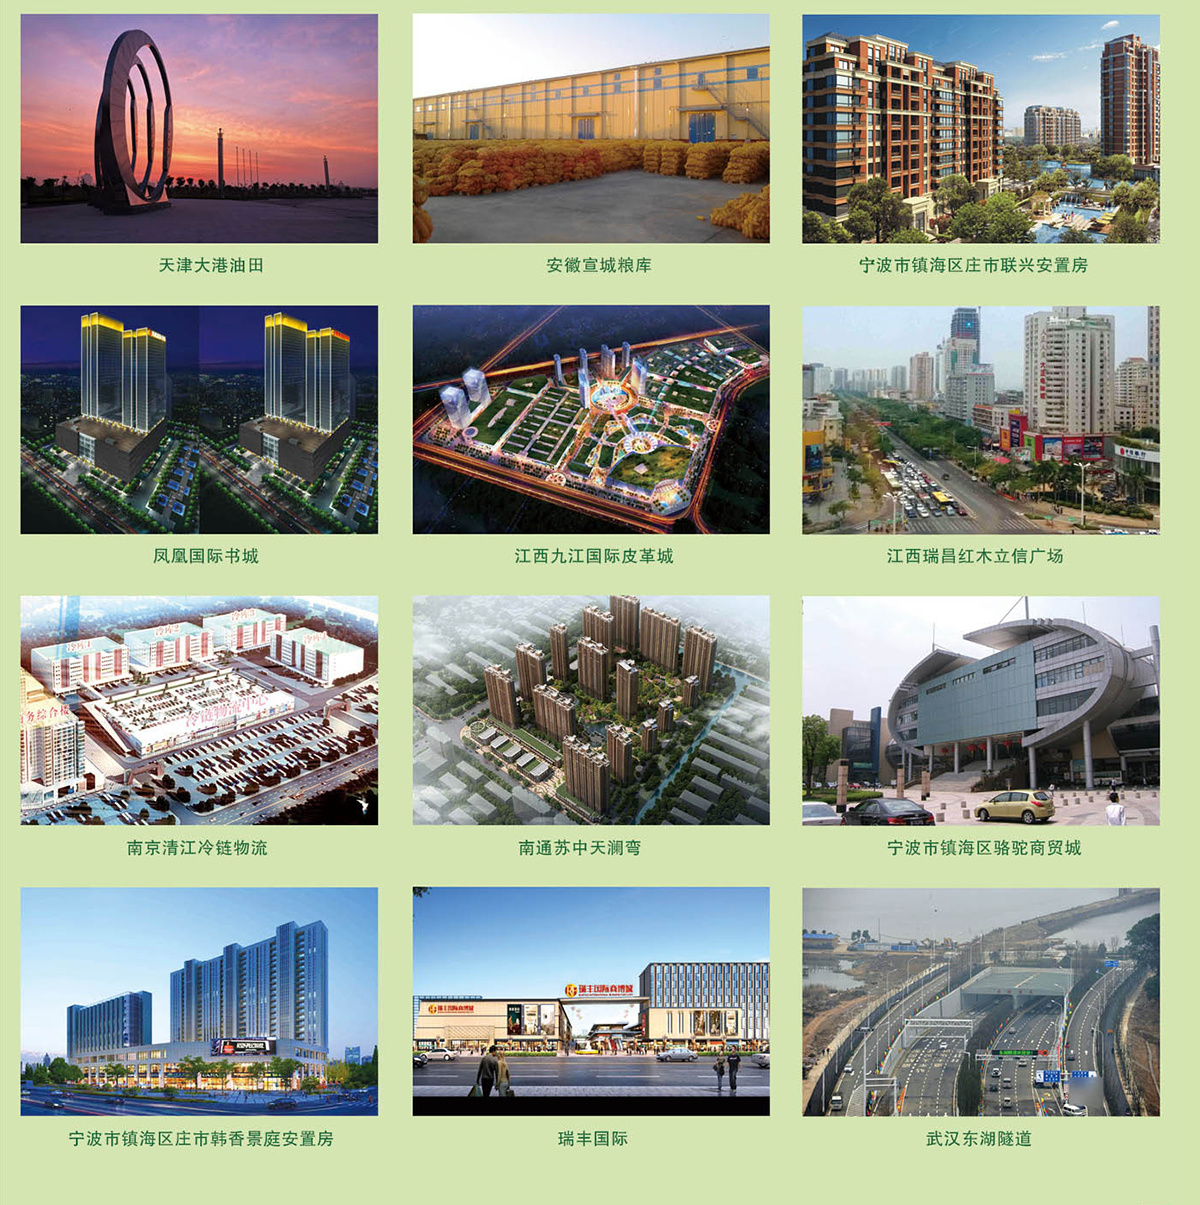 Key Projects in Southern China